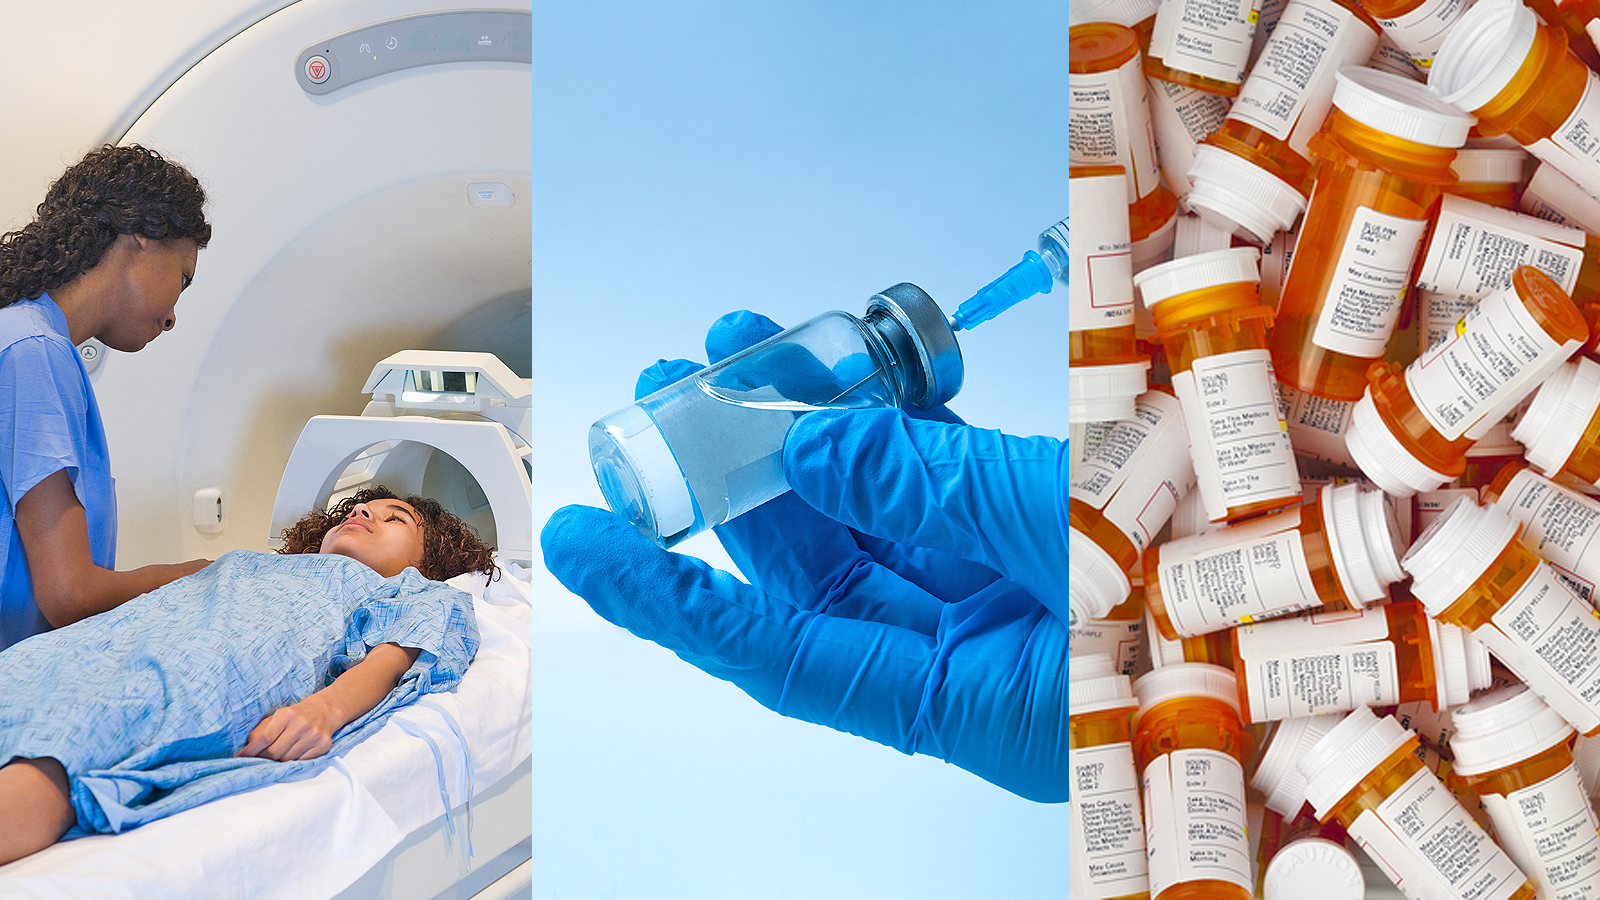 A collage of photos showing a teenage girl entering an MRI machine, a gloved hand inserting a syringe into a vaccine vial, and a pile of prescription pill bottles.